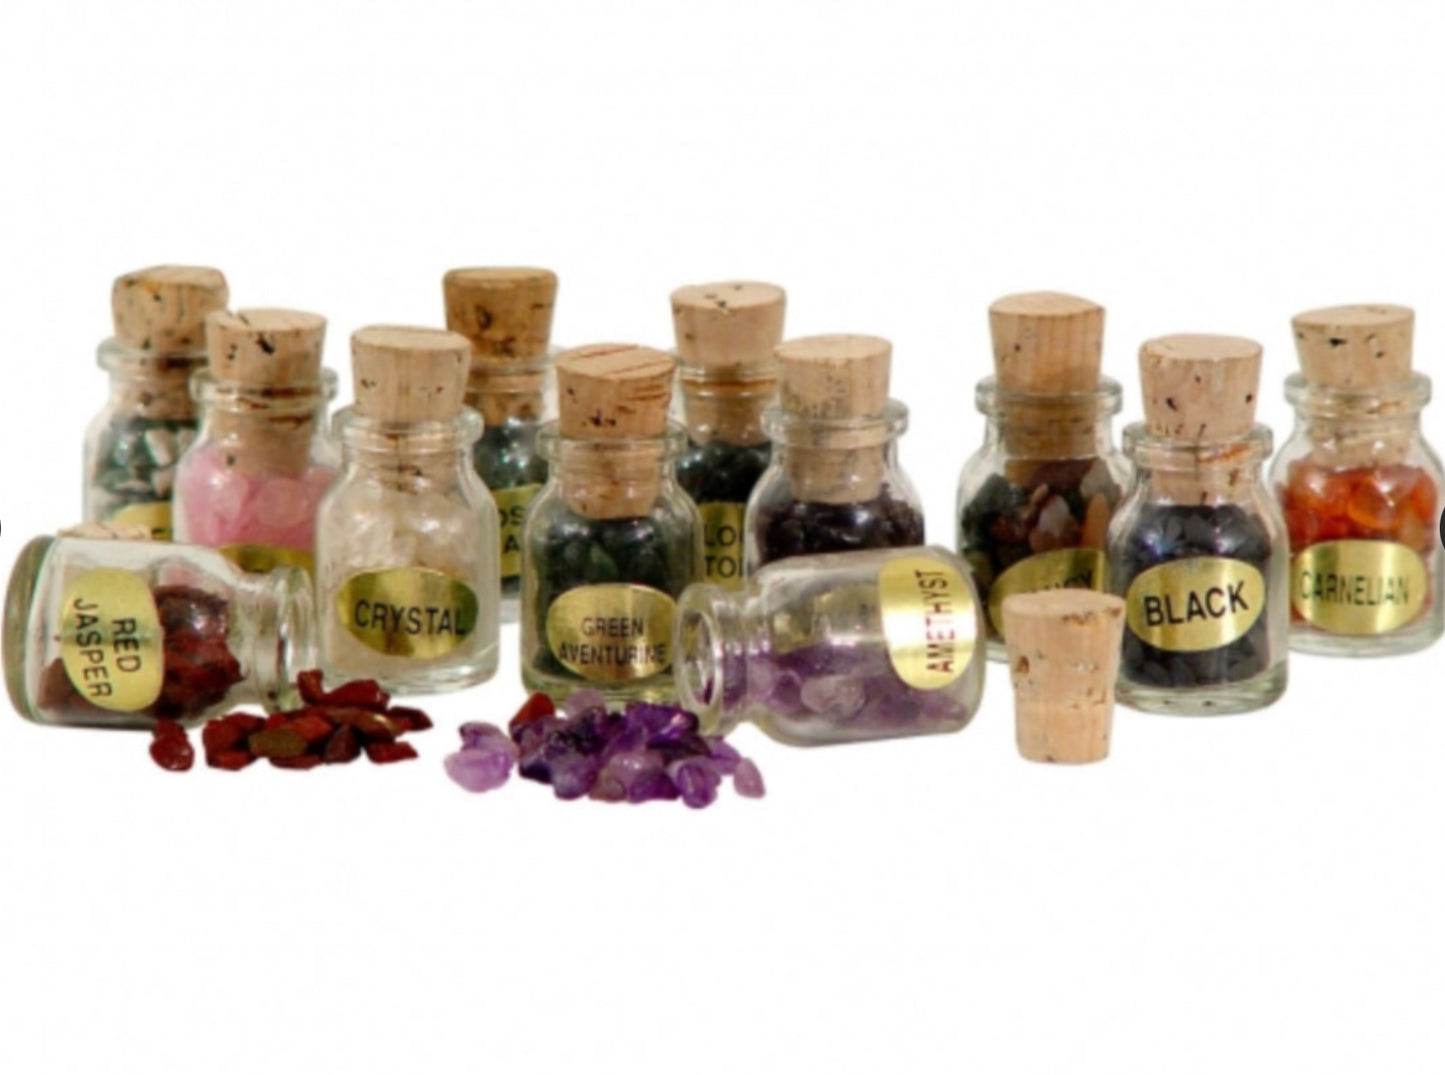 Stone Chips Bottles Assortment - Choose from 12 Crystal types!